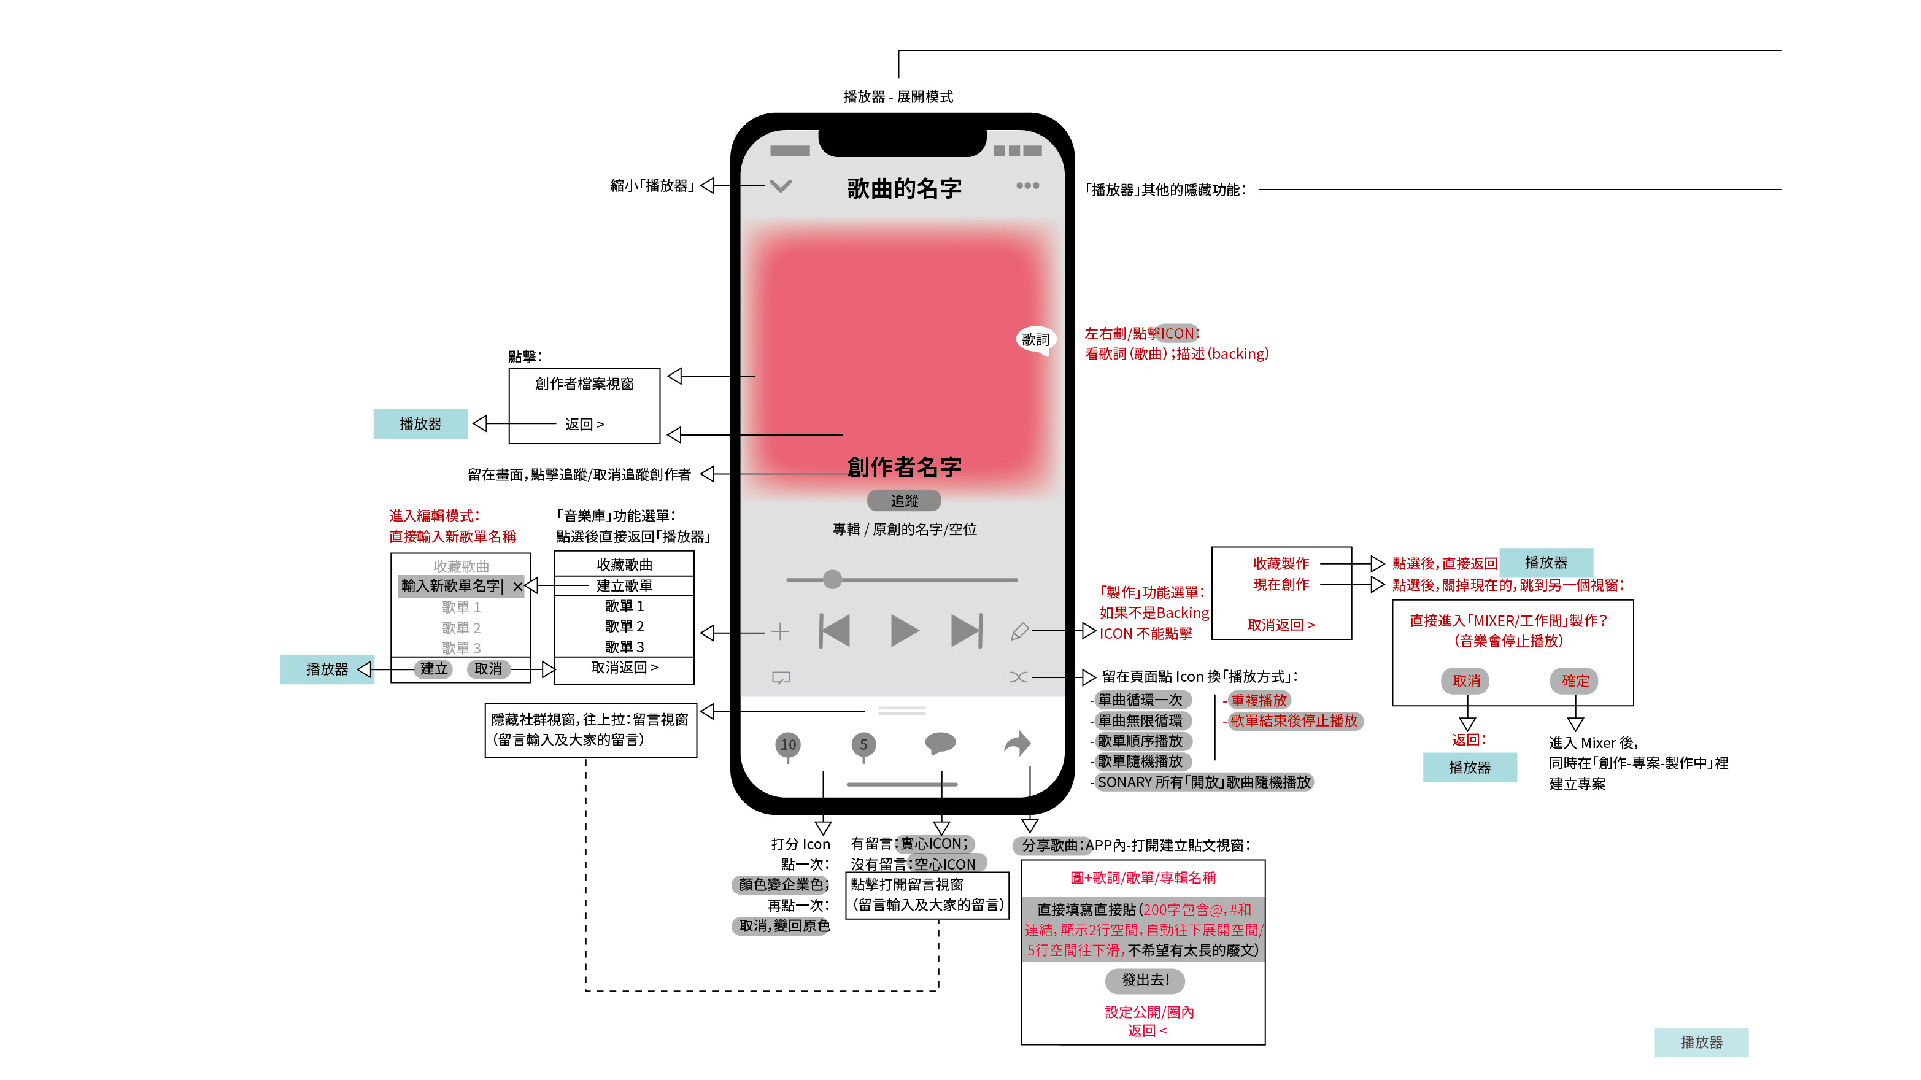 SONARY STUDY CASE | Experience Map of Music Player + Community